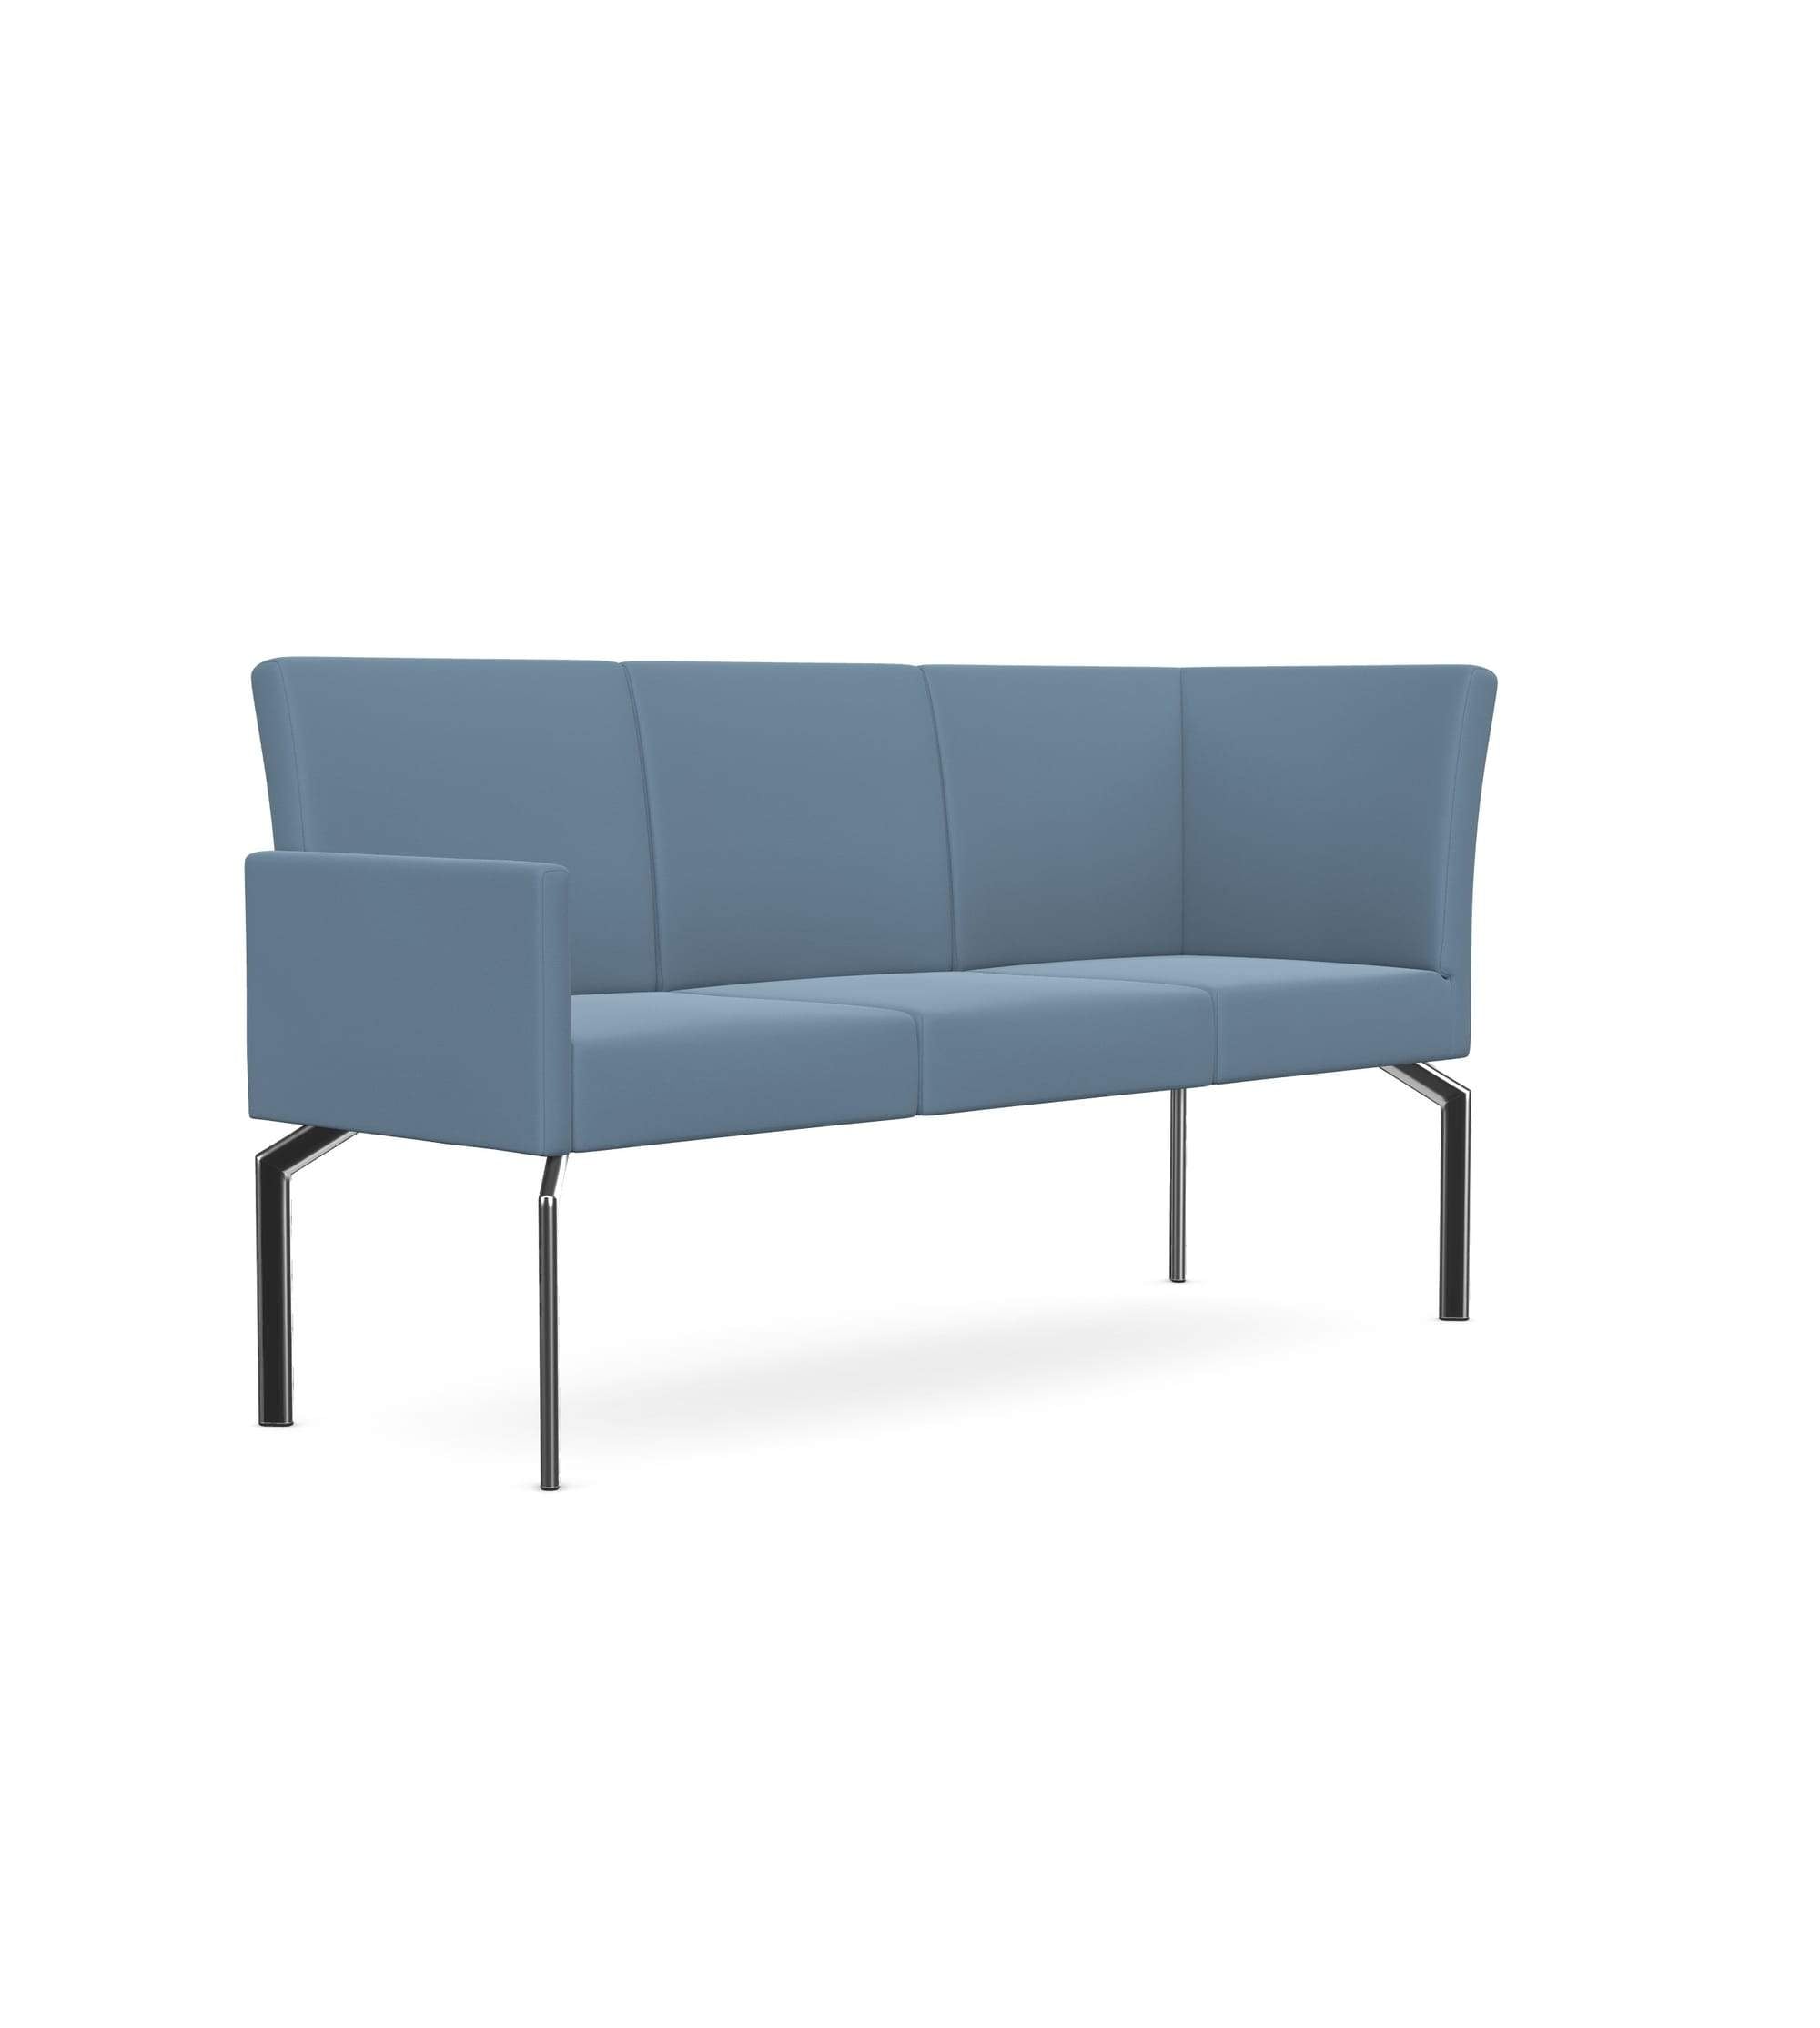 Cloud - 3 Seater with Backrest and Right Corner Armrest